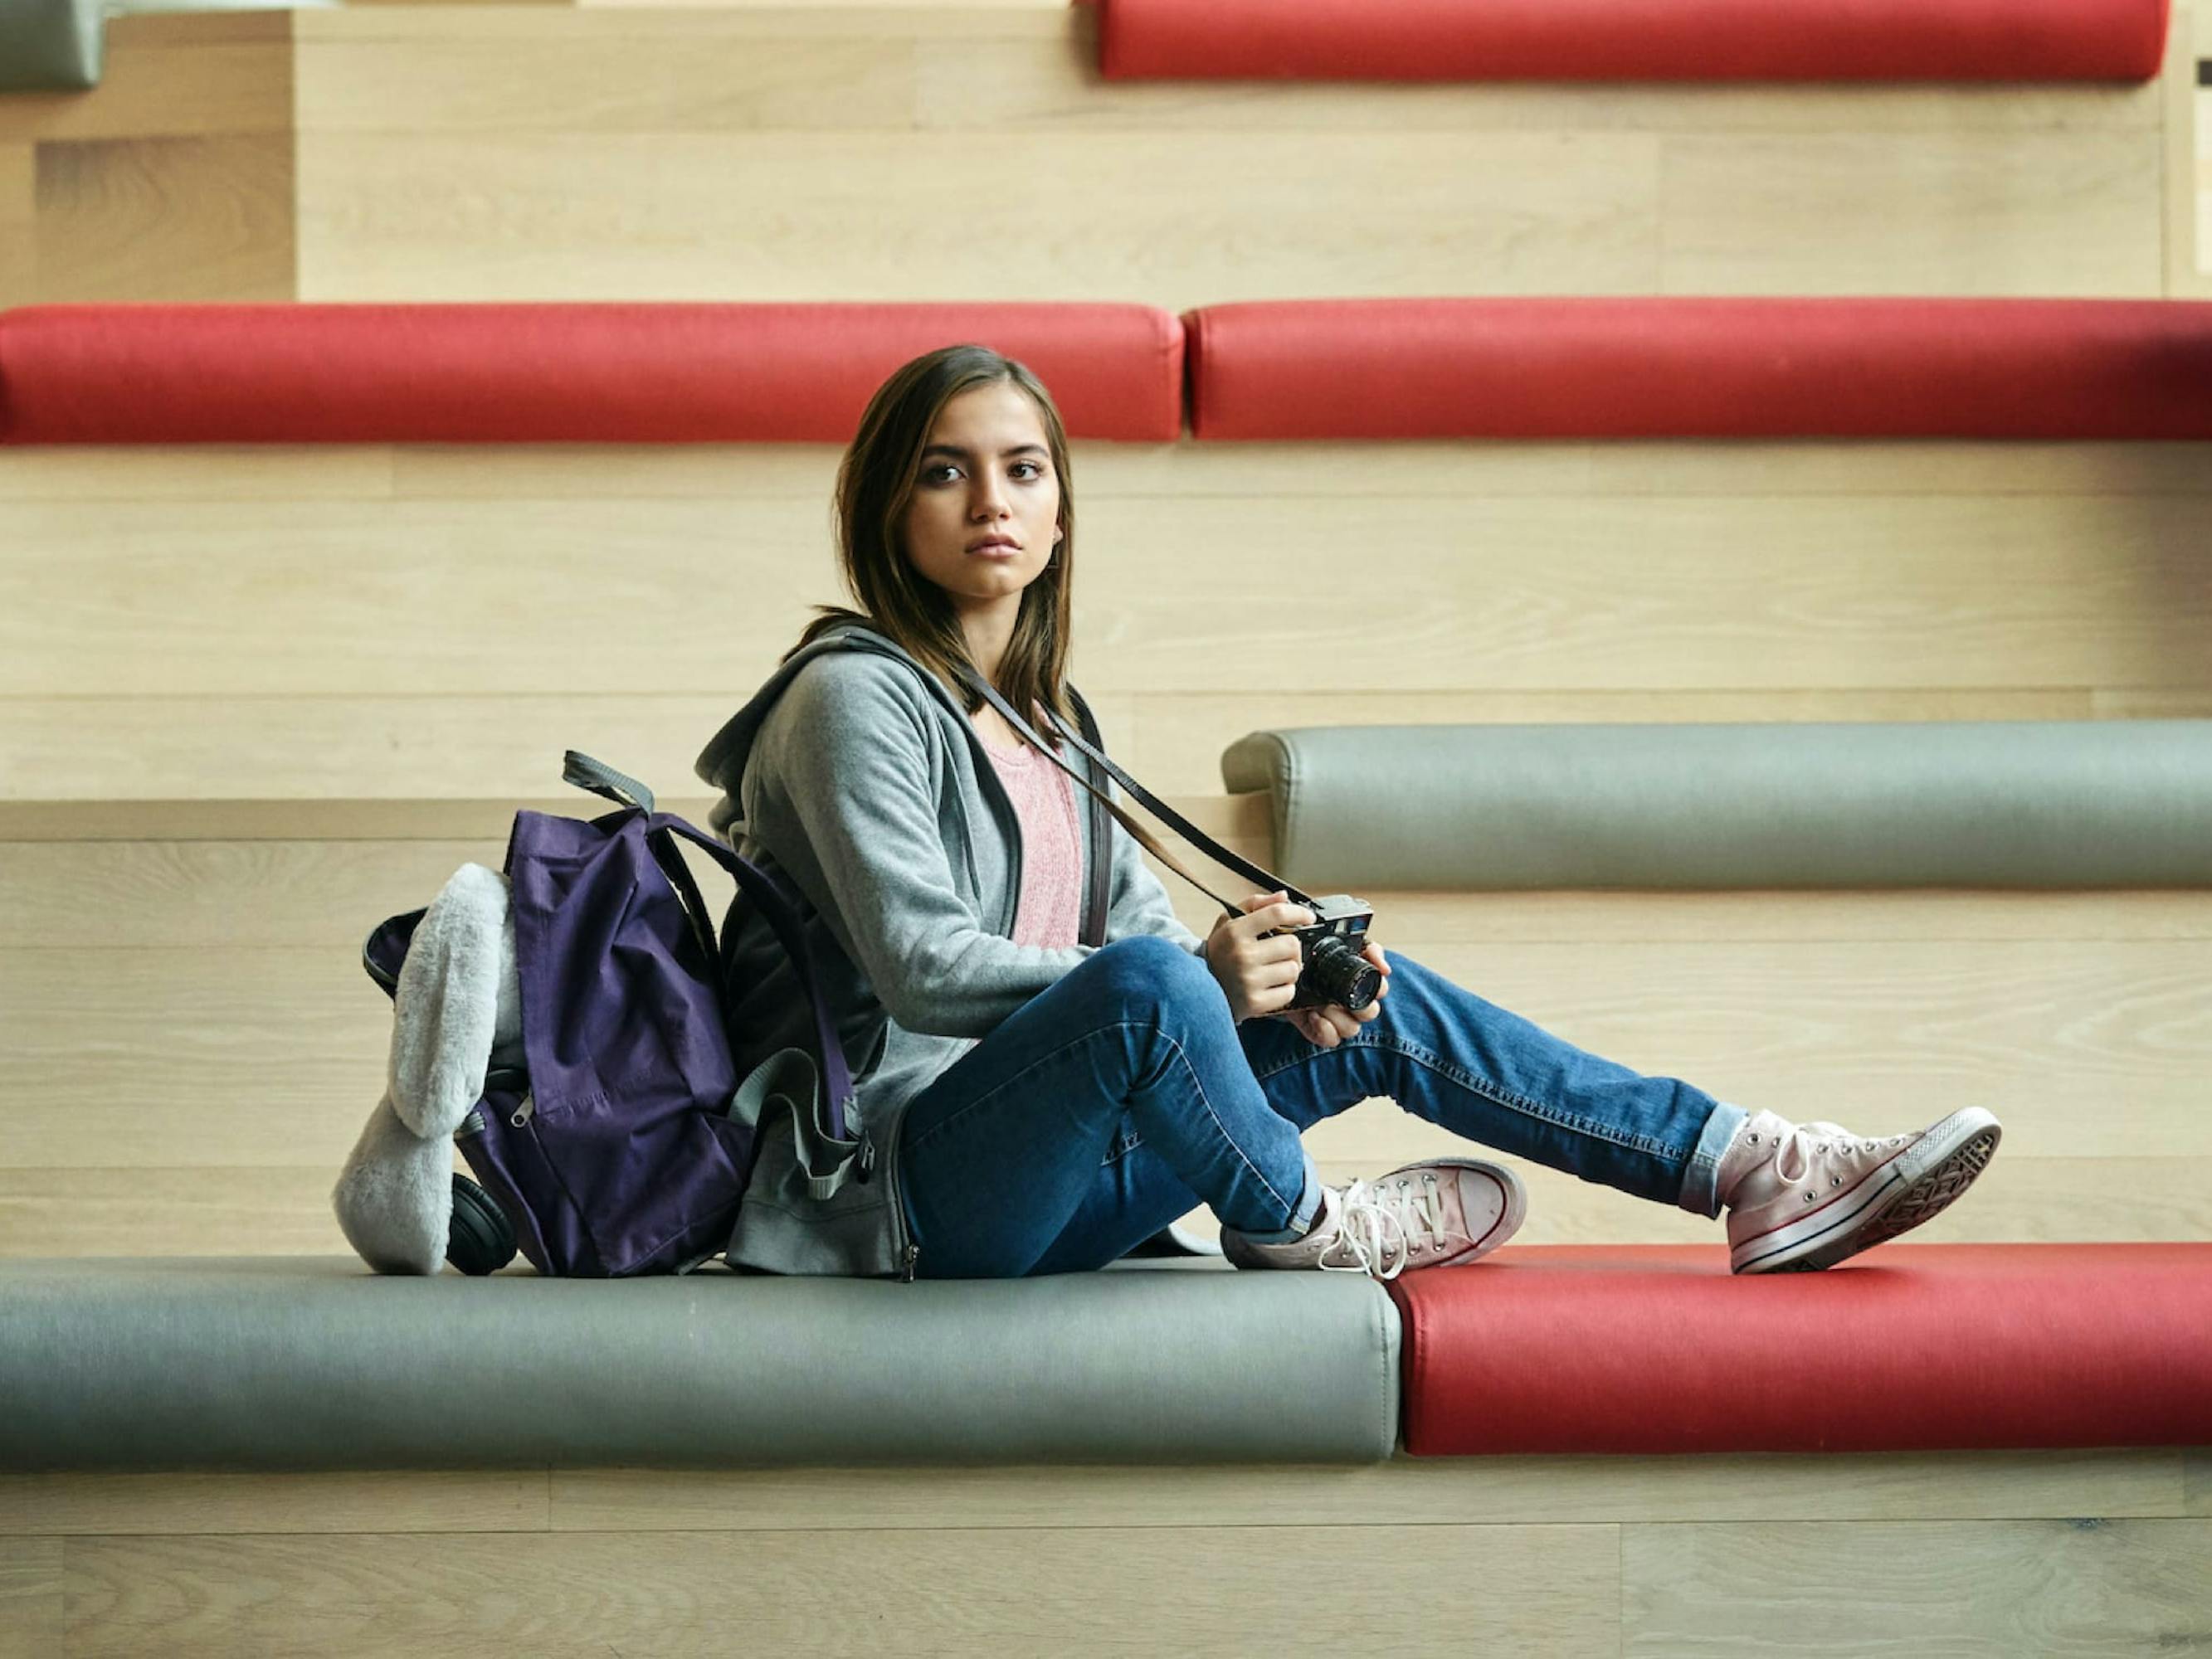 Rachel Cooper (Isabela Merced) in Sweet Girl. She sits on some red and grey bleachers with jeans and a purple backpack.